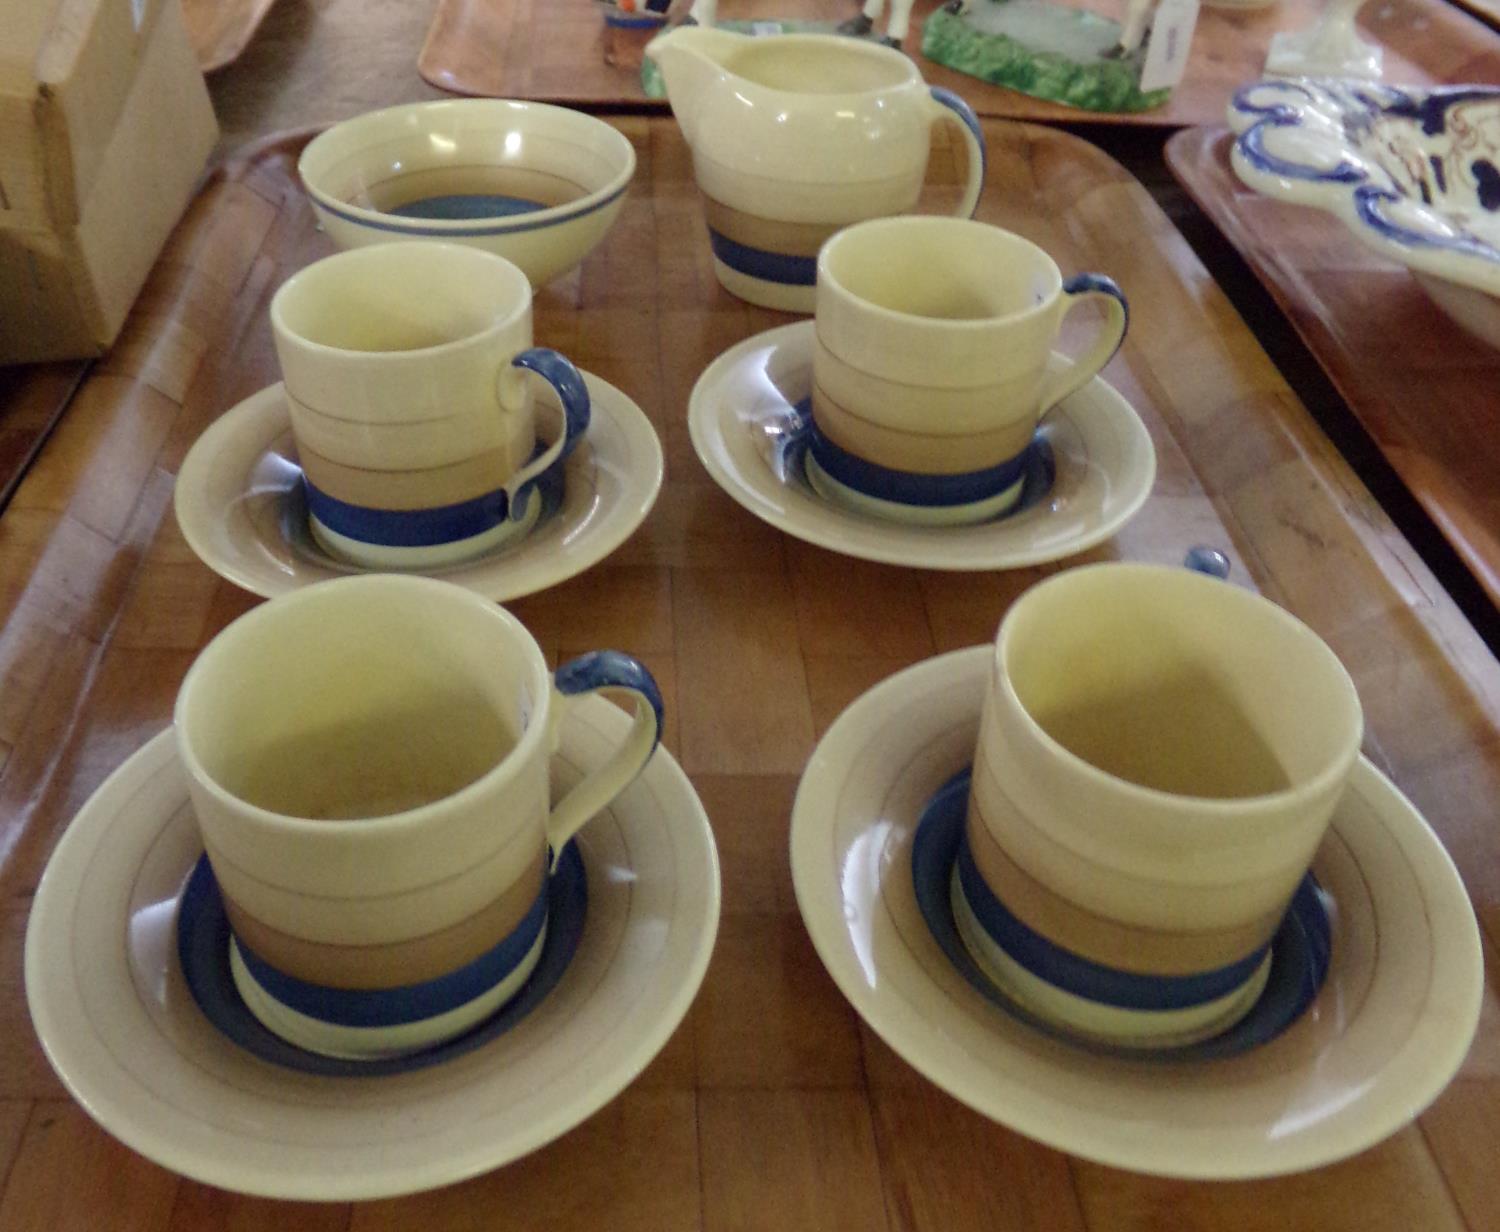 Tray of vintage Susie Cooper part coffee ware: four espresso cups and saucers, sugar bowl and milk